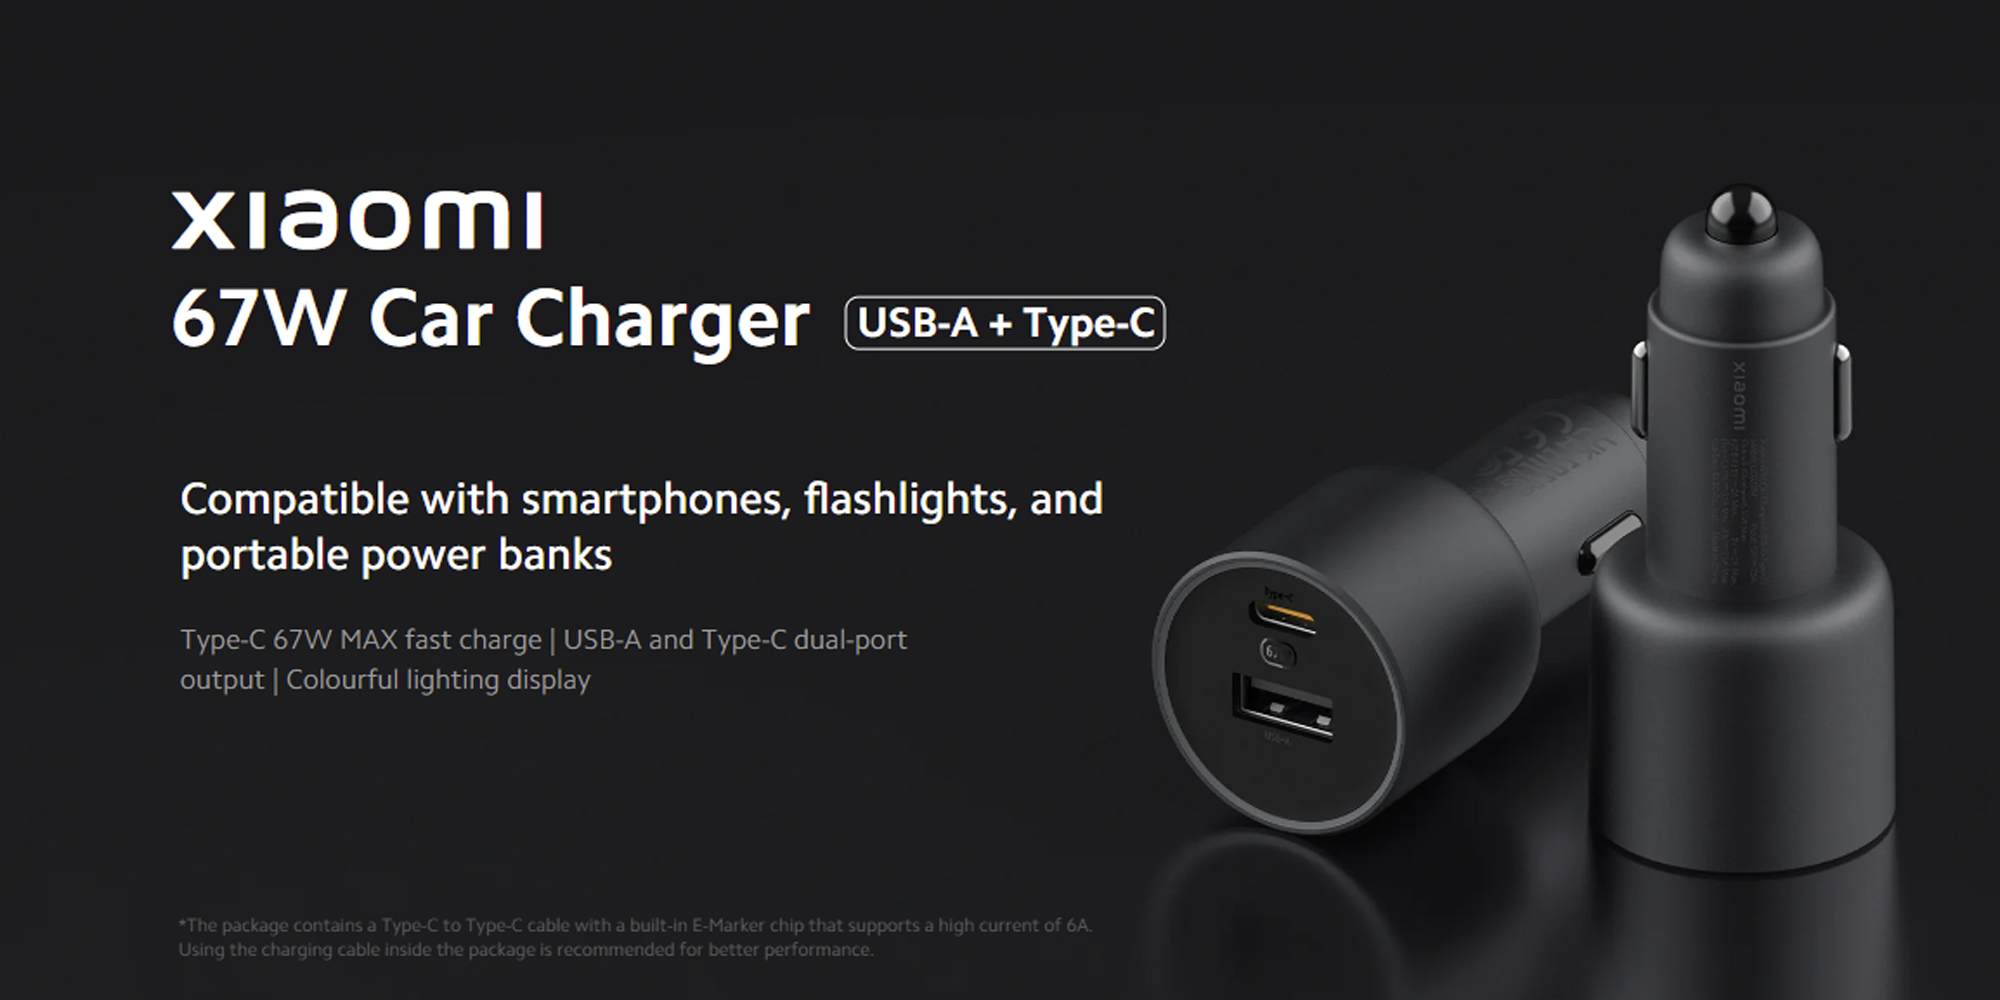 Xiaomi 67W Car Charger (USB-A + Type C)